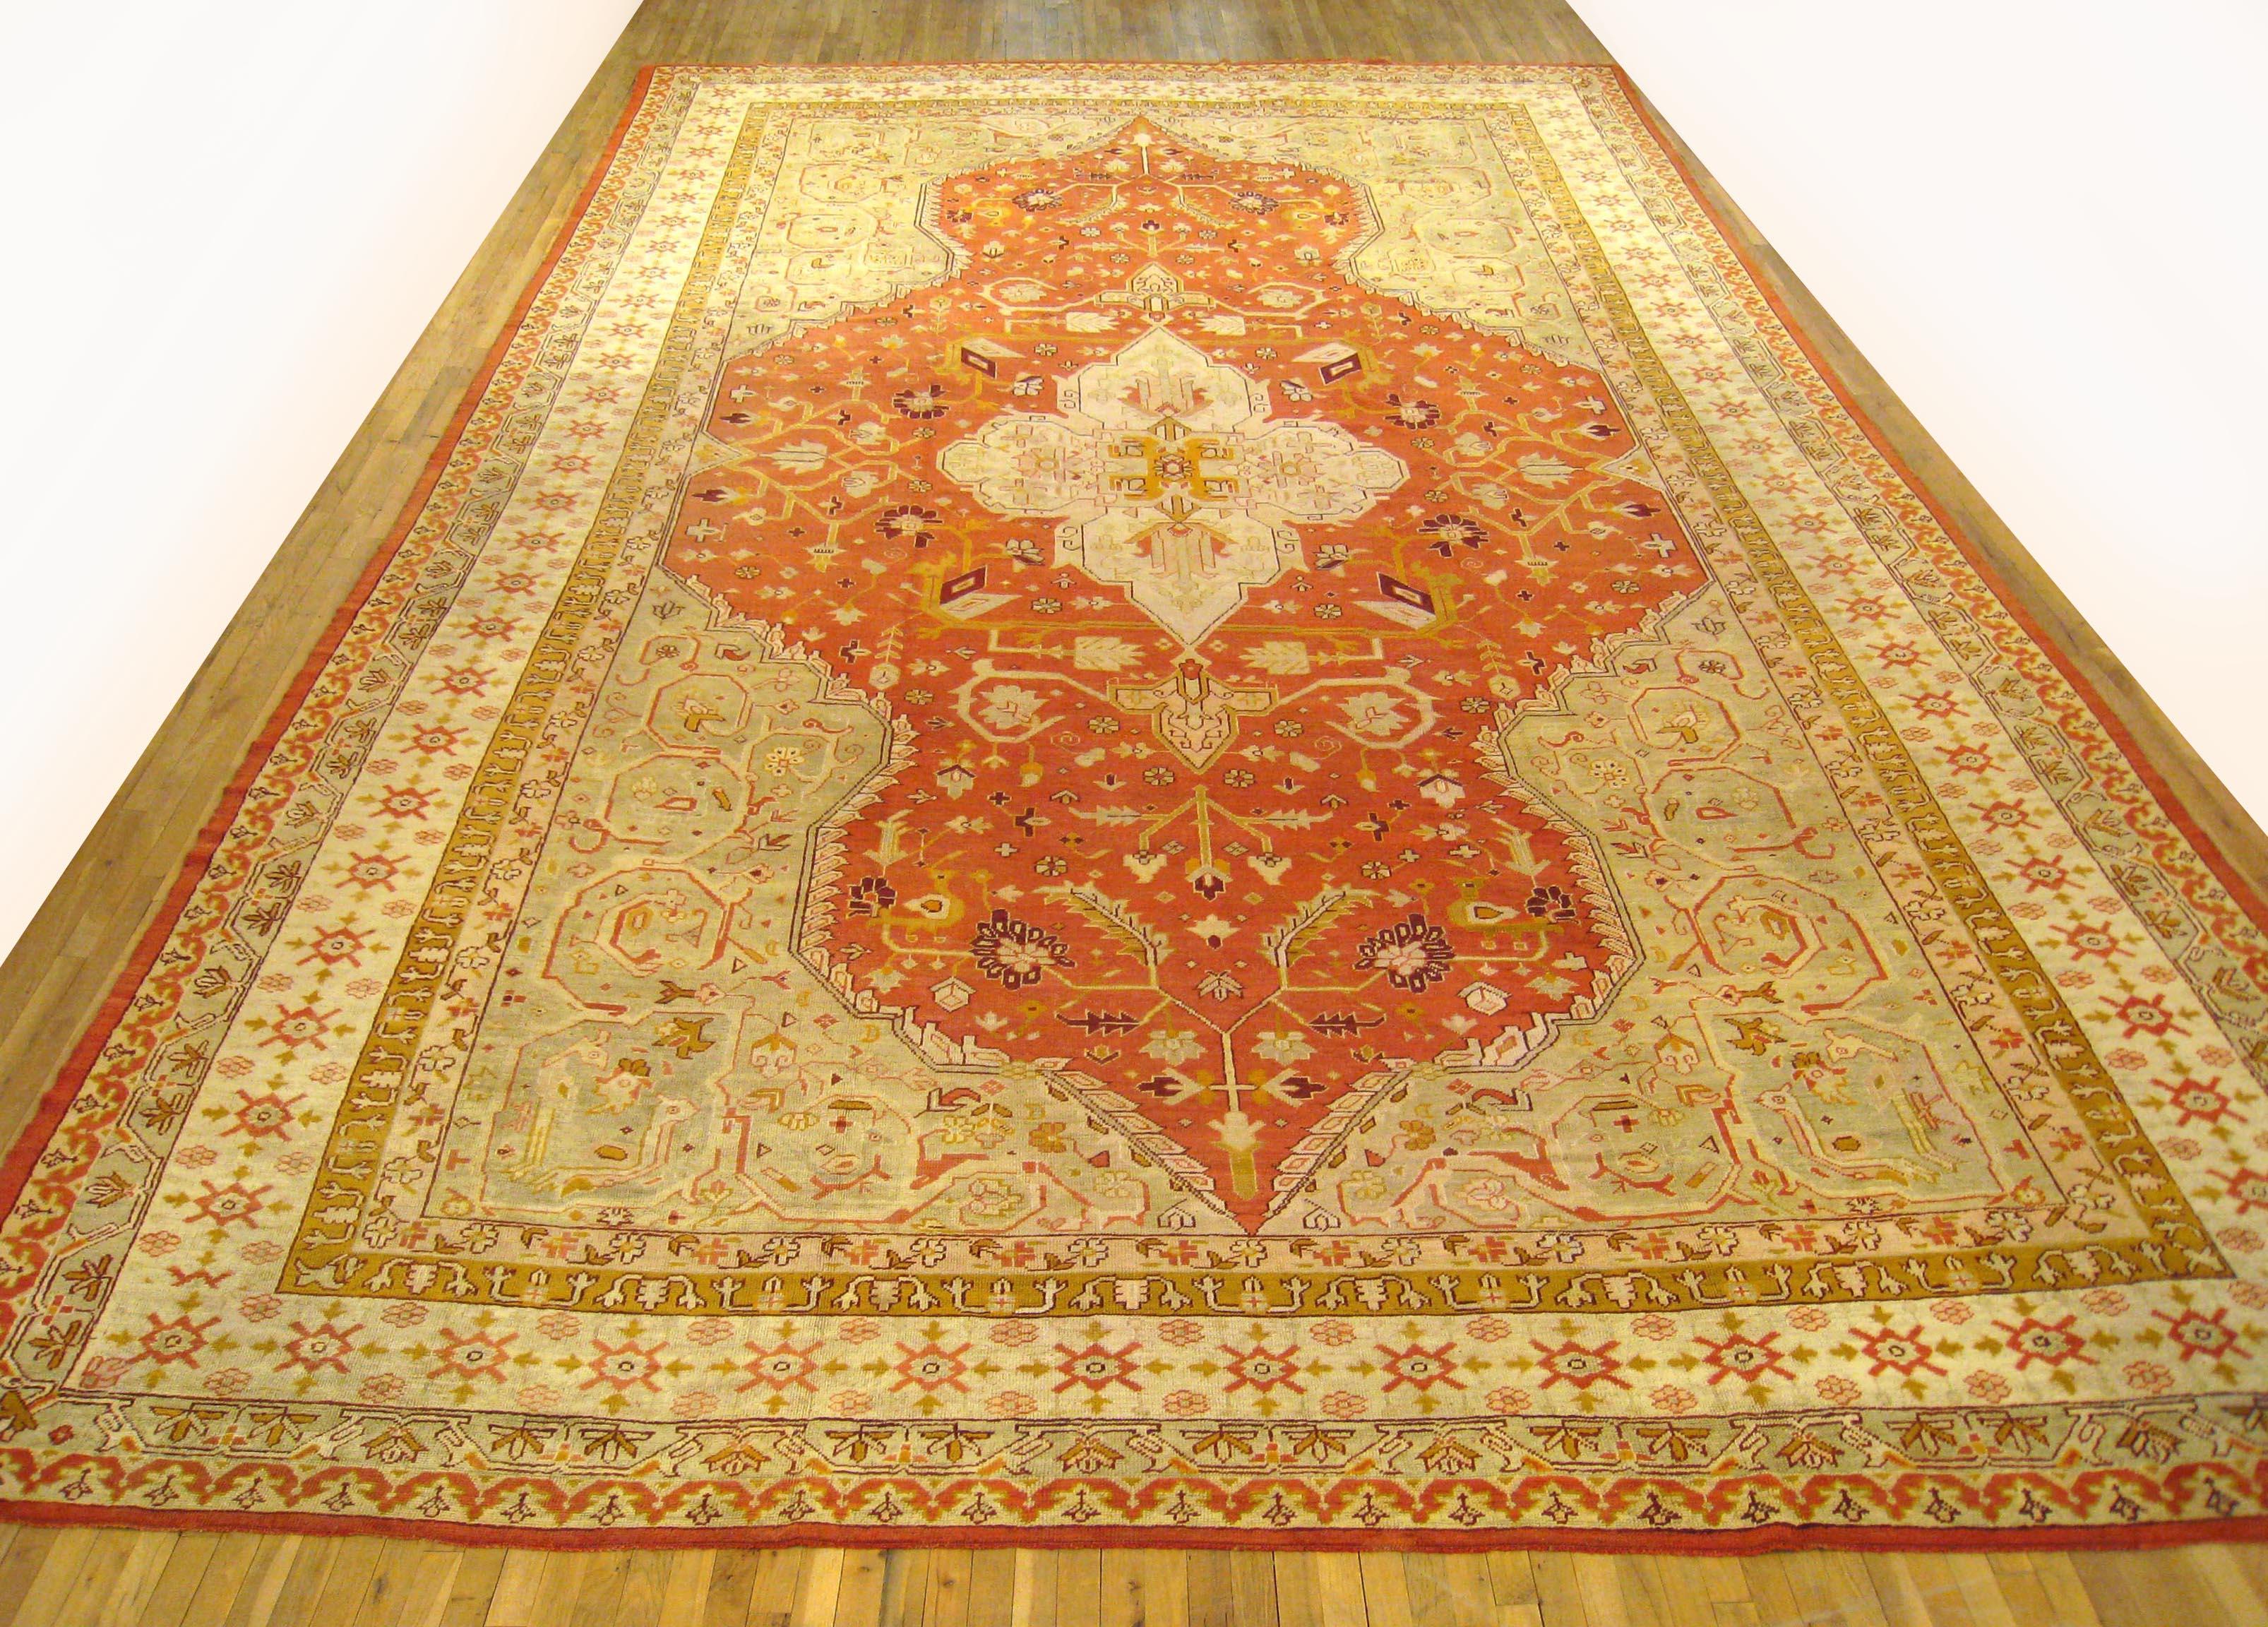 A palace sized antique Turkish Oushak carpet, circa 1900, size 22'7 x 13'9. This grand carpet features a small medallion within a larger medallion shaped primary field, creating a unique visual effect of multiple medallions arising from one another.